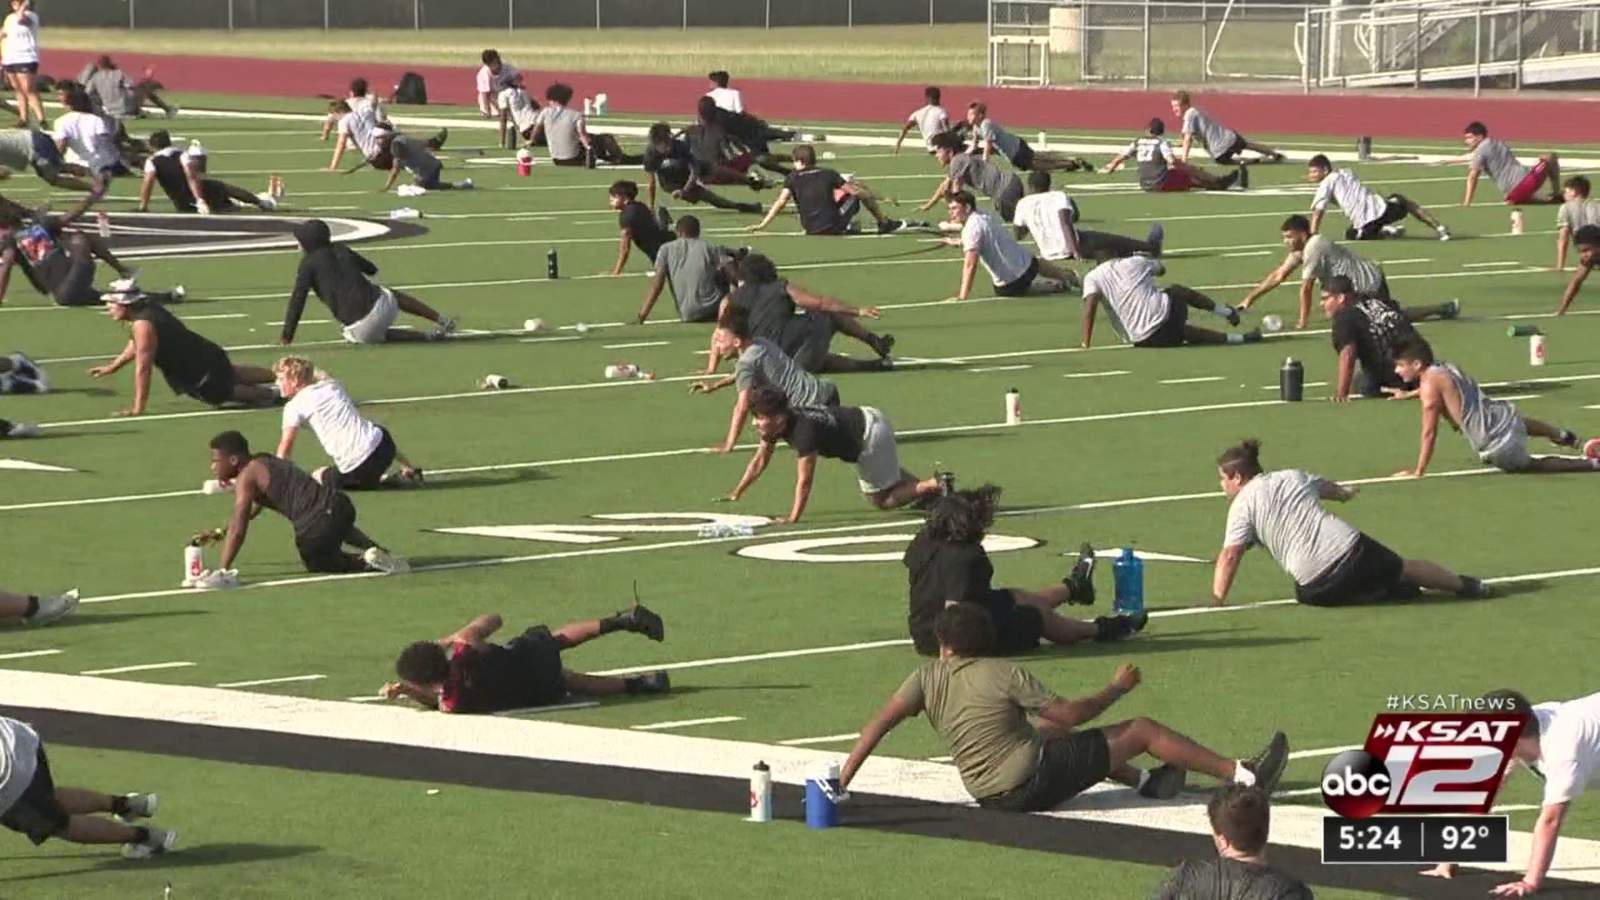 Steele athletes return to campus for workouts under strict guidelines